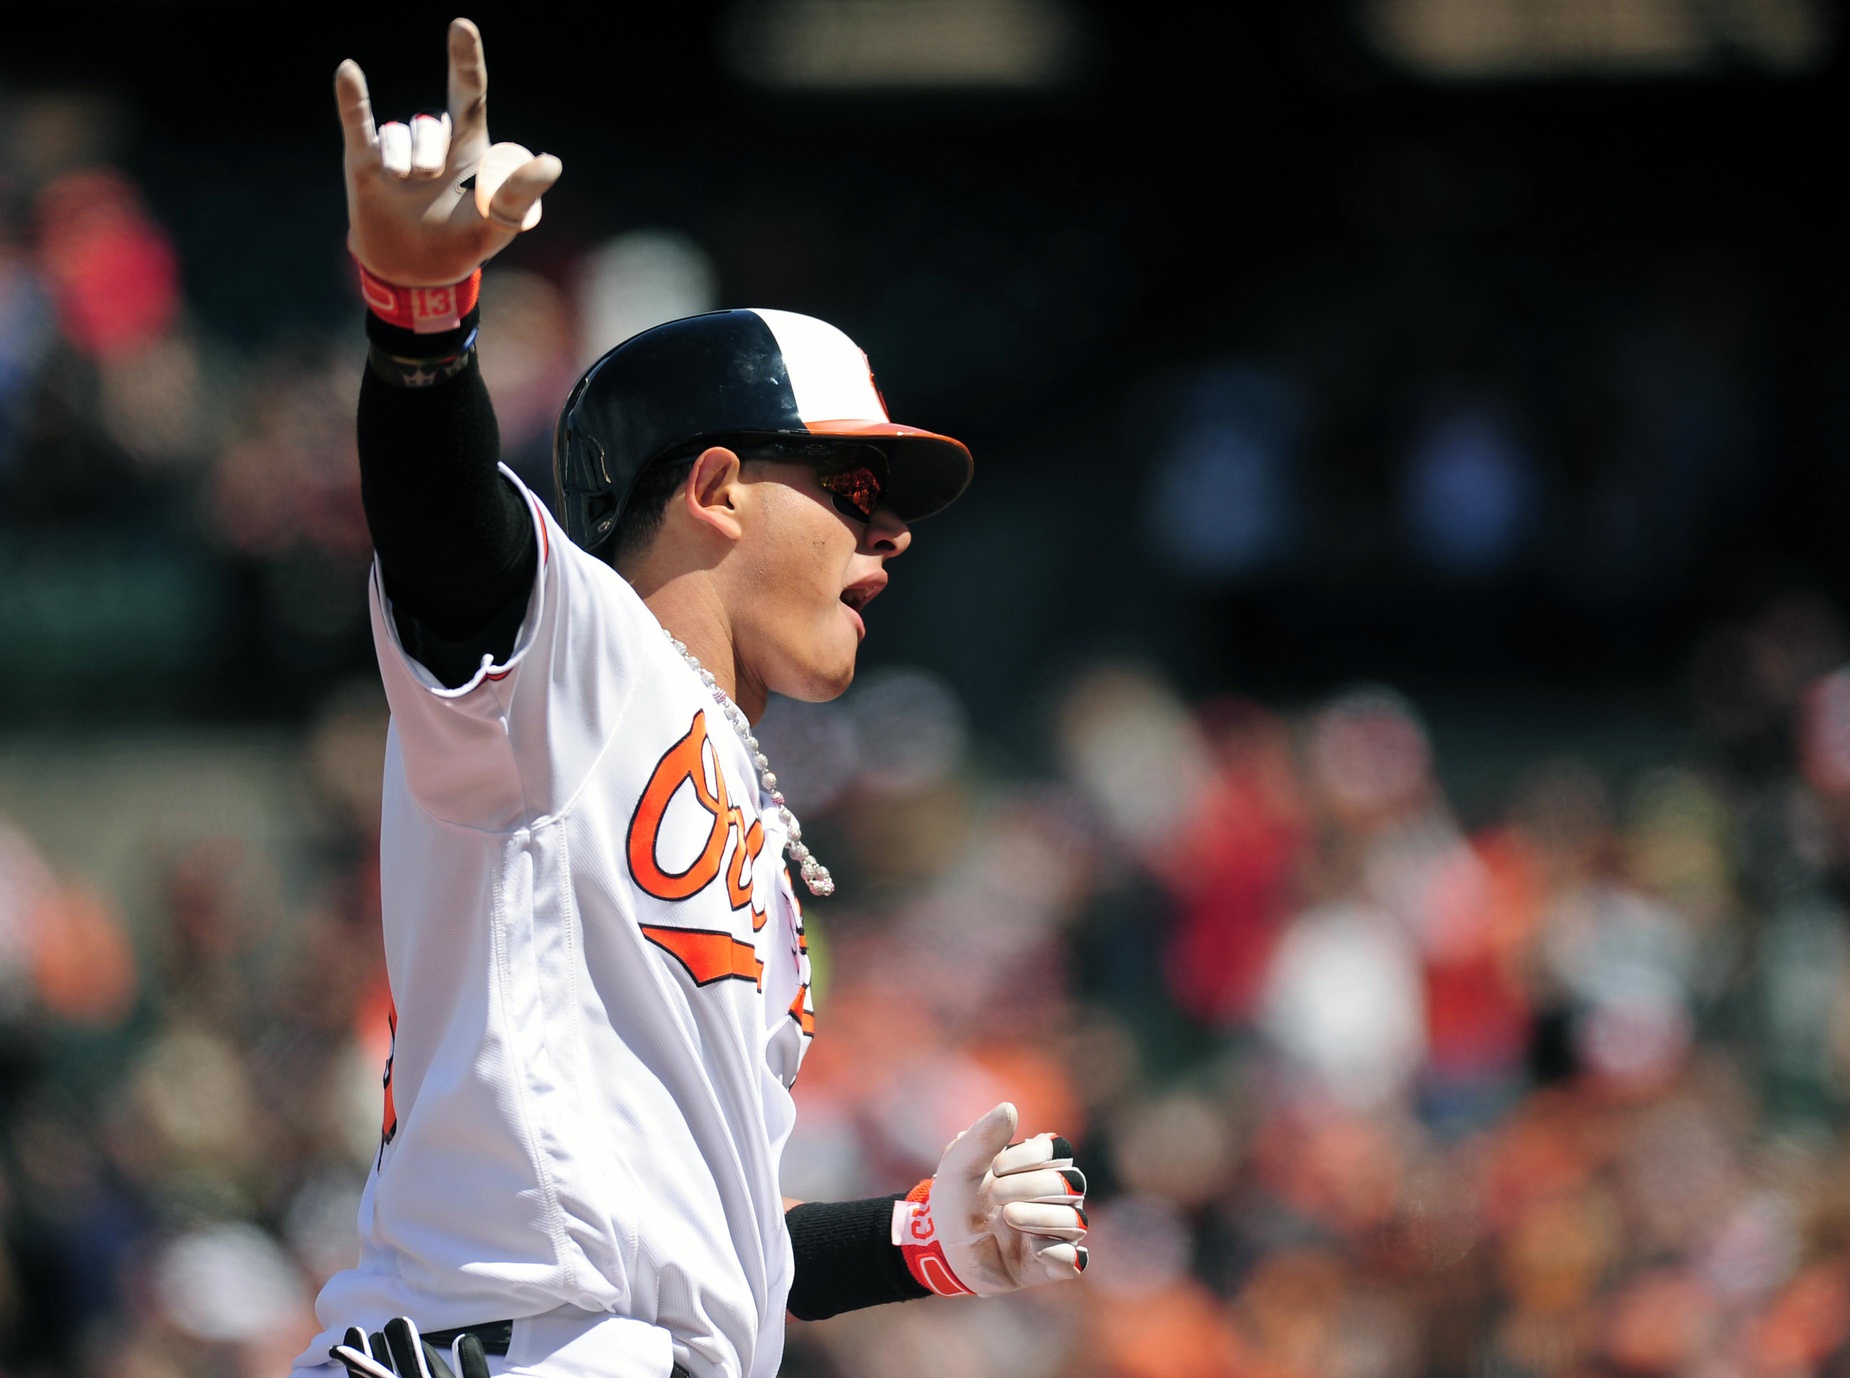 Apr 10, 2016; Baltimore, MD, USA; Baltimore Orioles third baseman Manny Machado (13) celebrates after hitting a home run in the second inning against the Tampa Bay Rays at Oriole Park at Camden Yards. Mandatory Credit: Evan Habeeb-USA TODAY Sports 